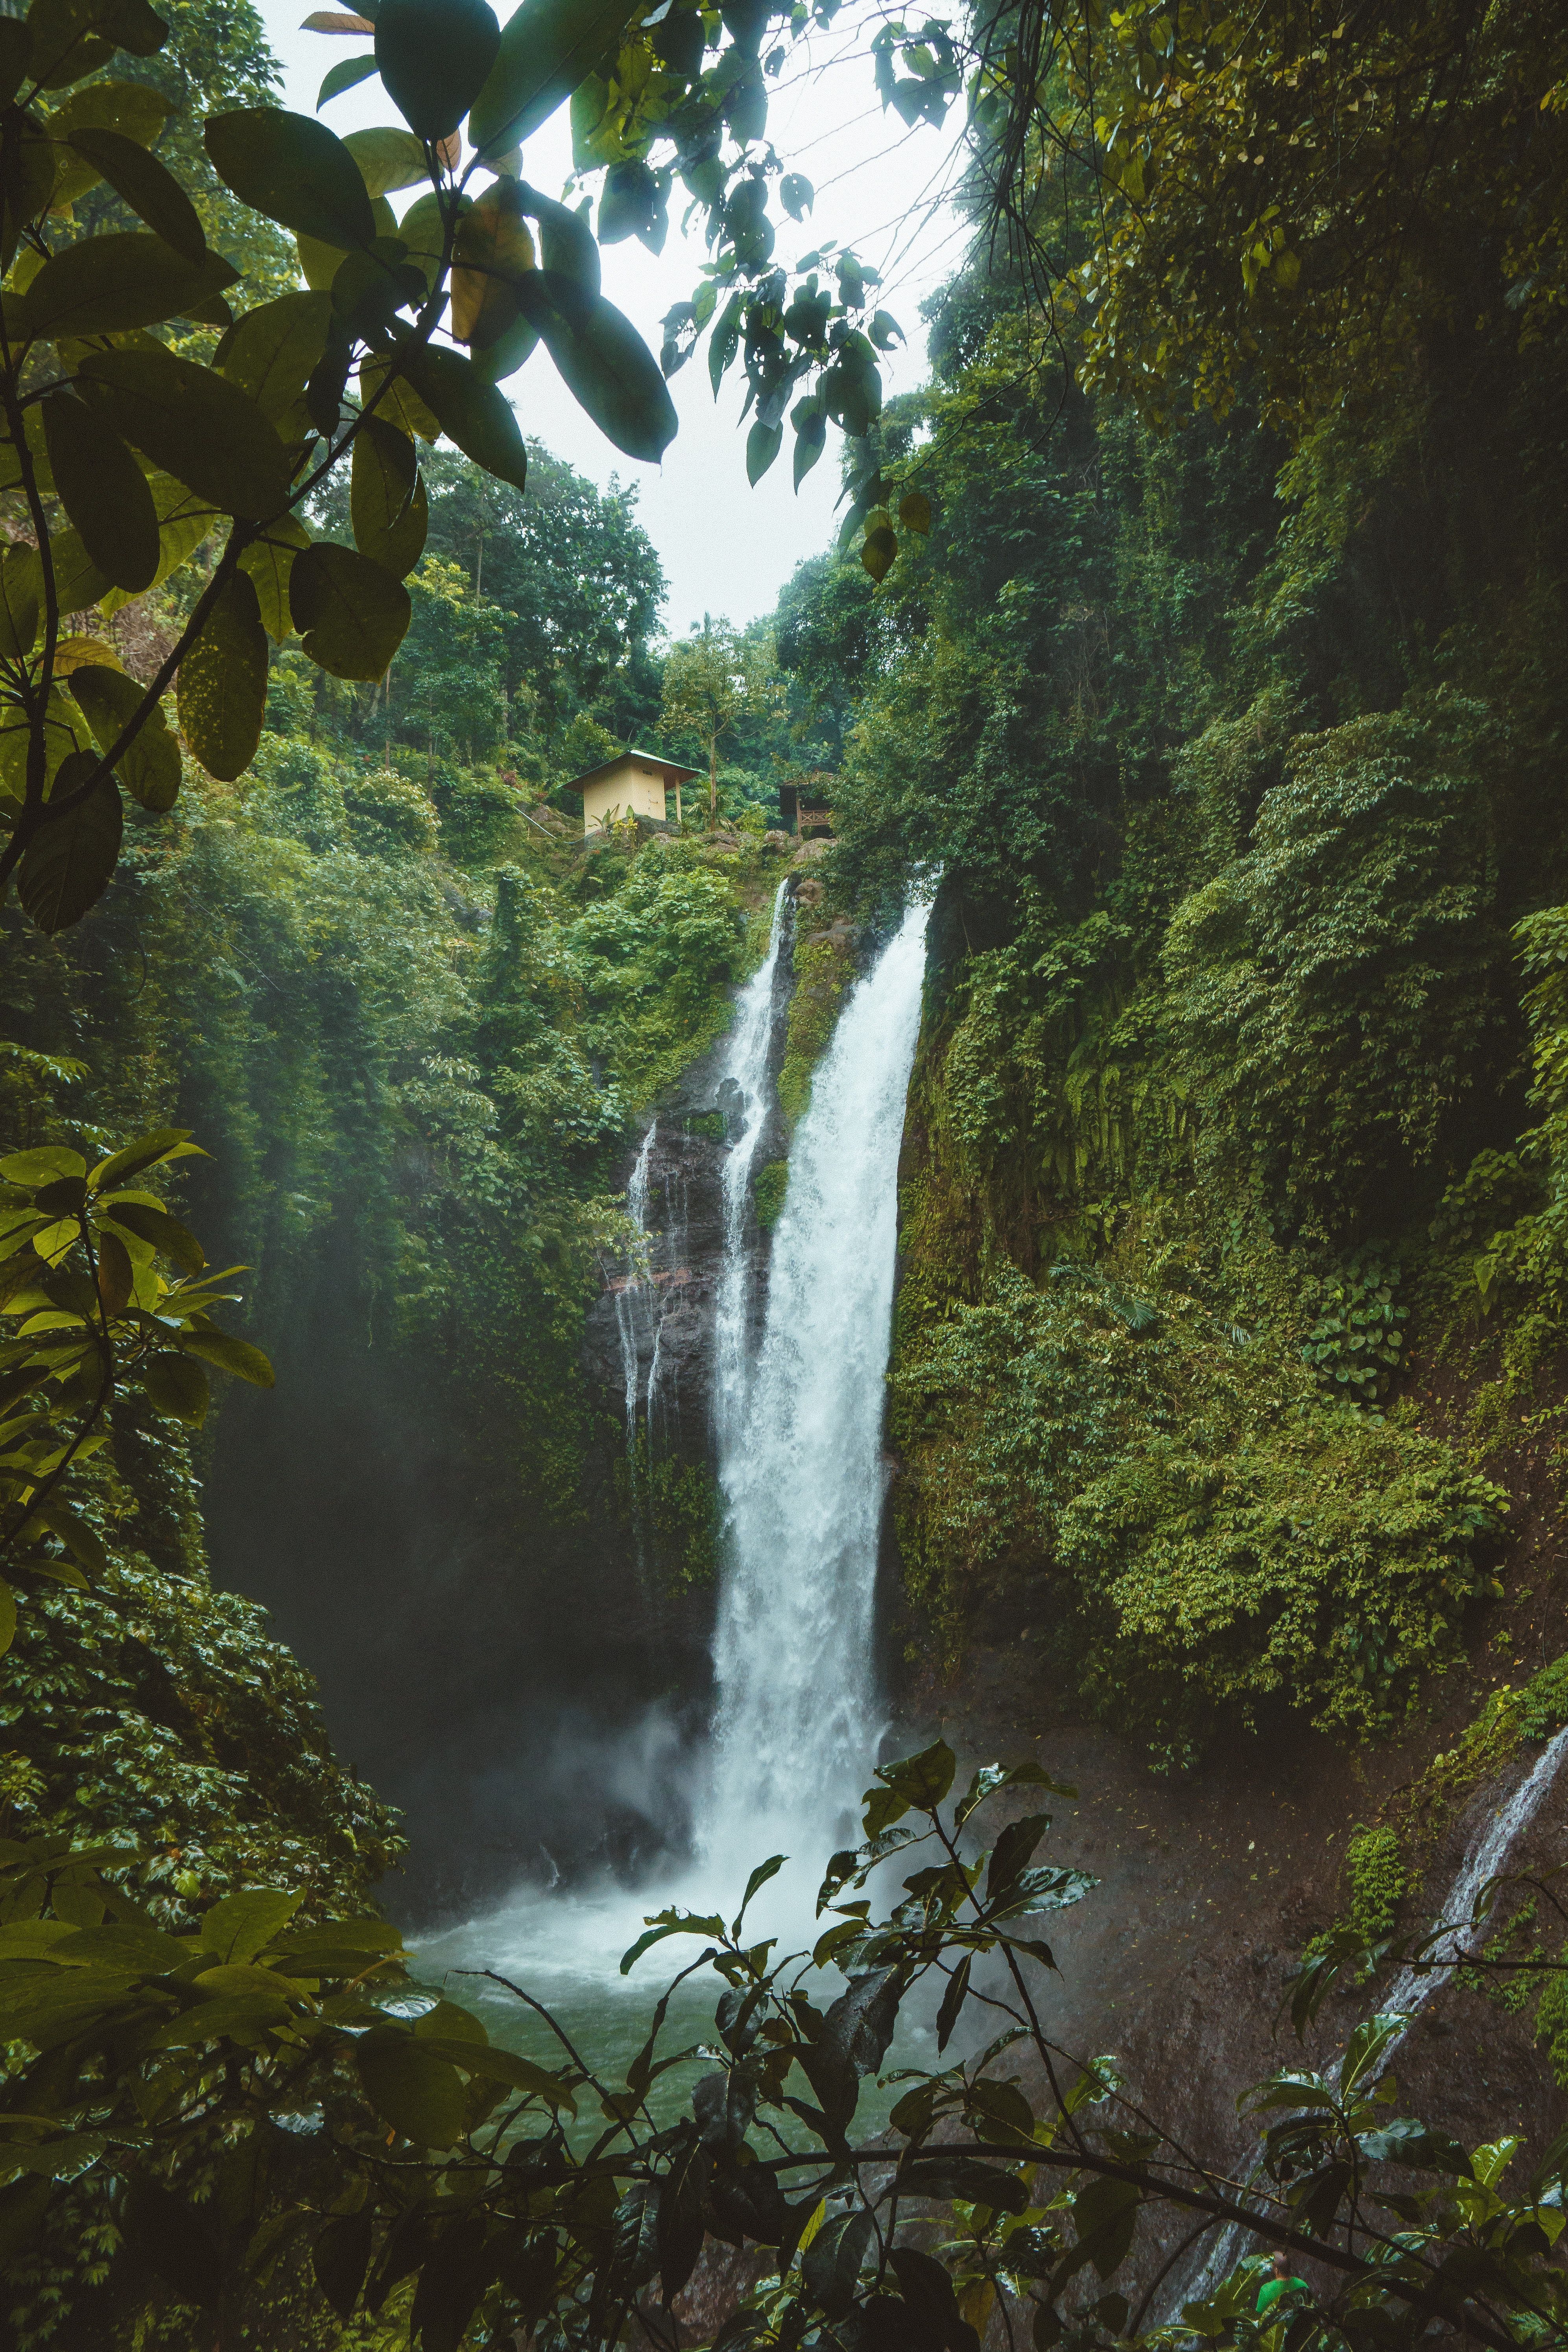 A waterfall surrounded by lush greenery in Bali, Indonesia - Jungle, scenery, waterfall